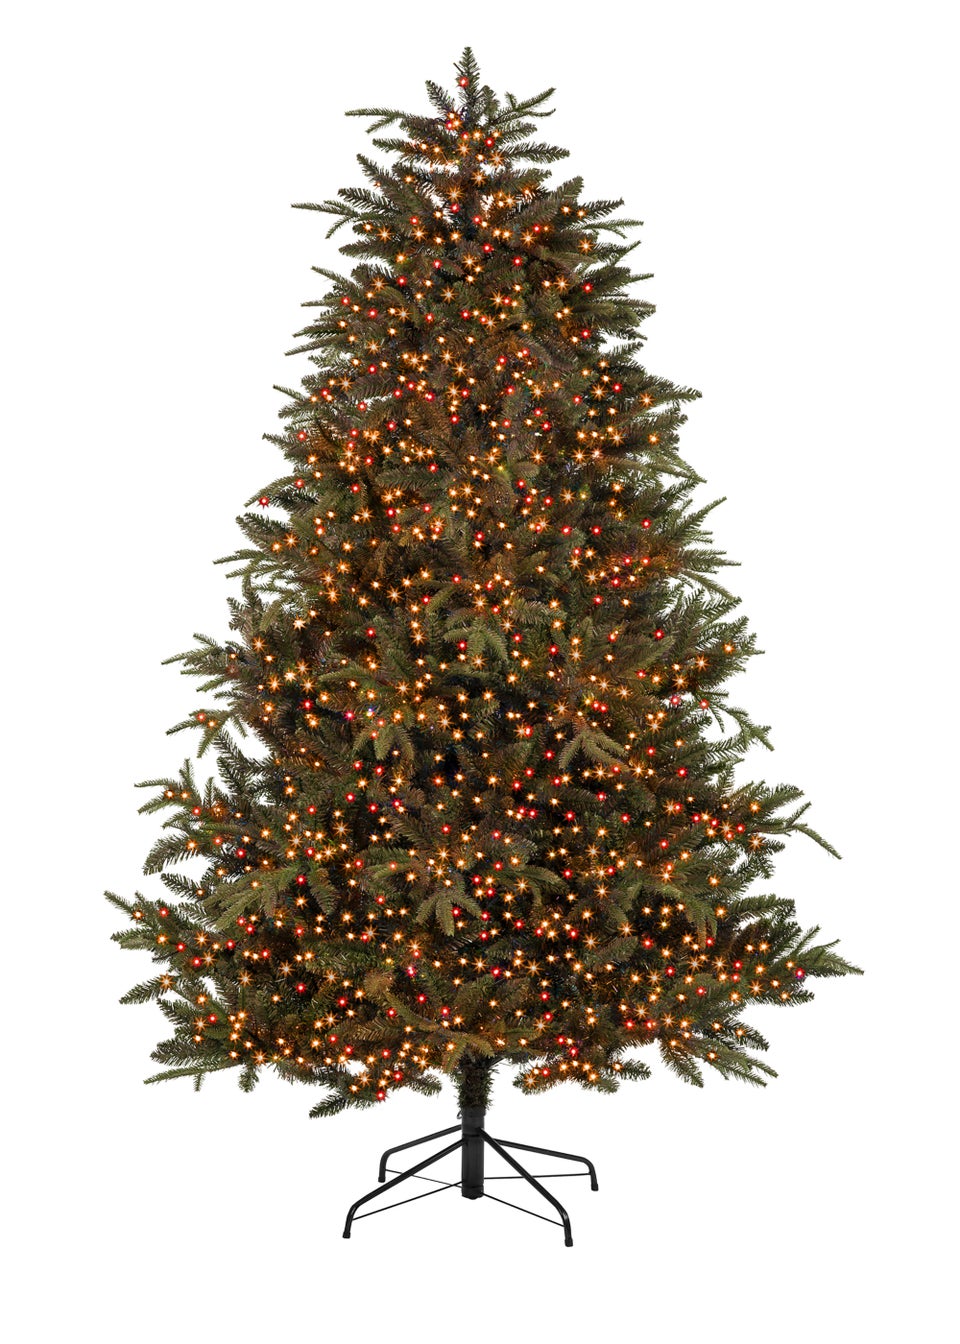 Premier Decorations 1000 Red and Vintage Gold LED Treebrights